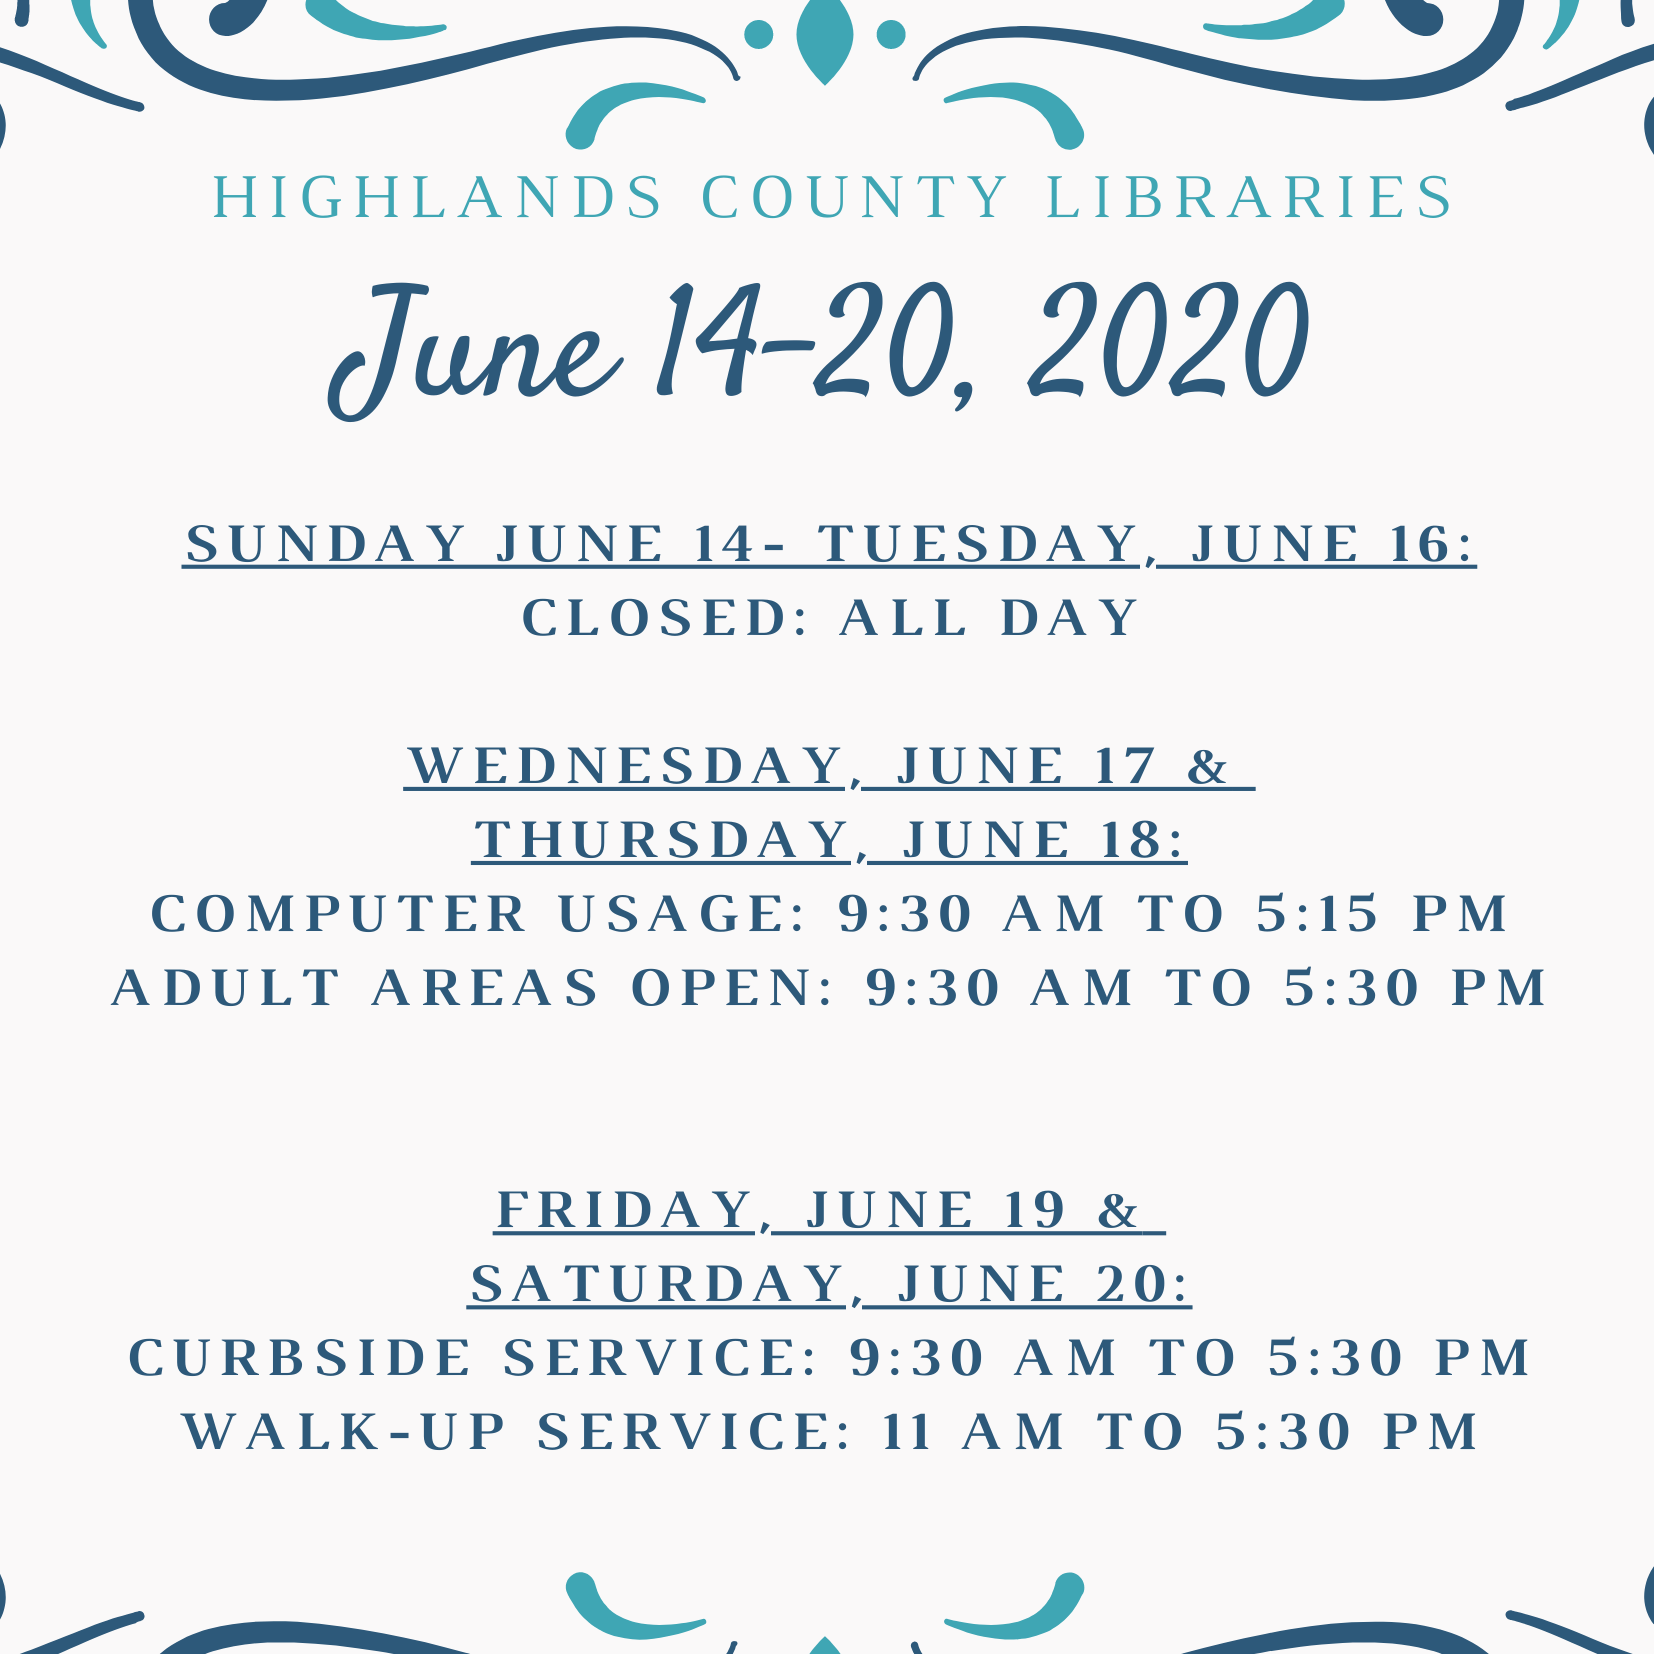 schedule for the Highlands County Libraries June 14-20, 2020